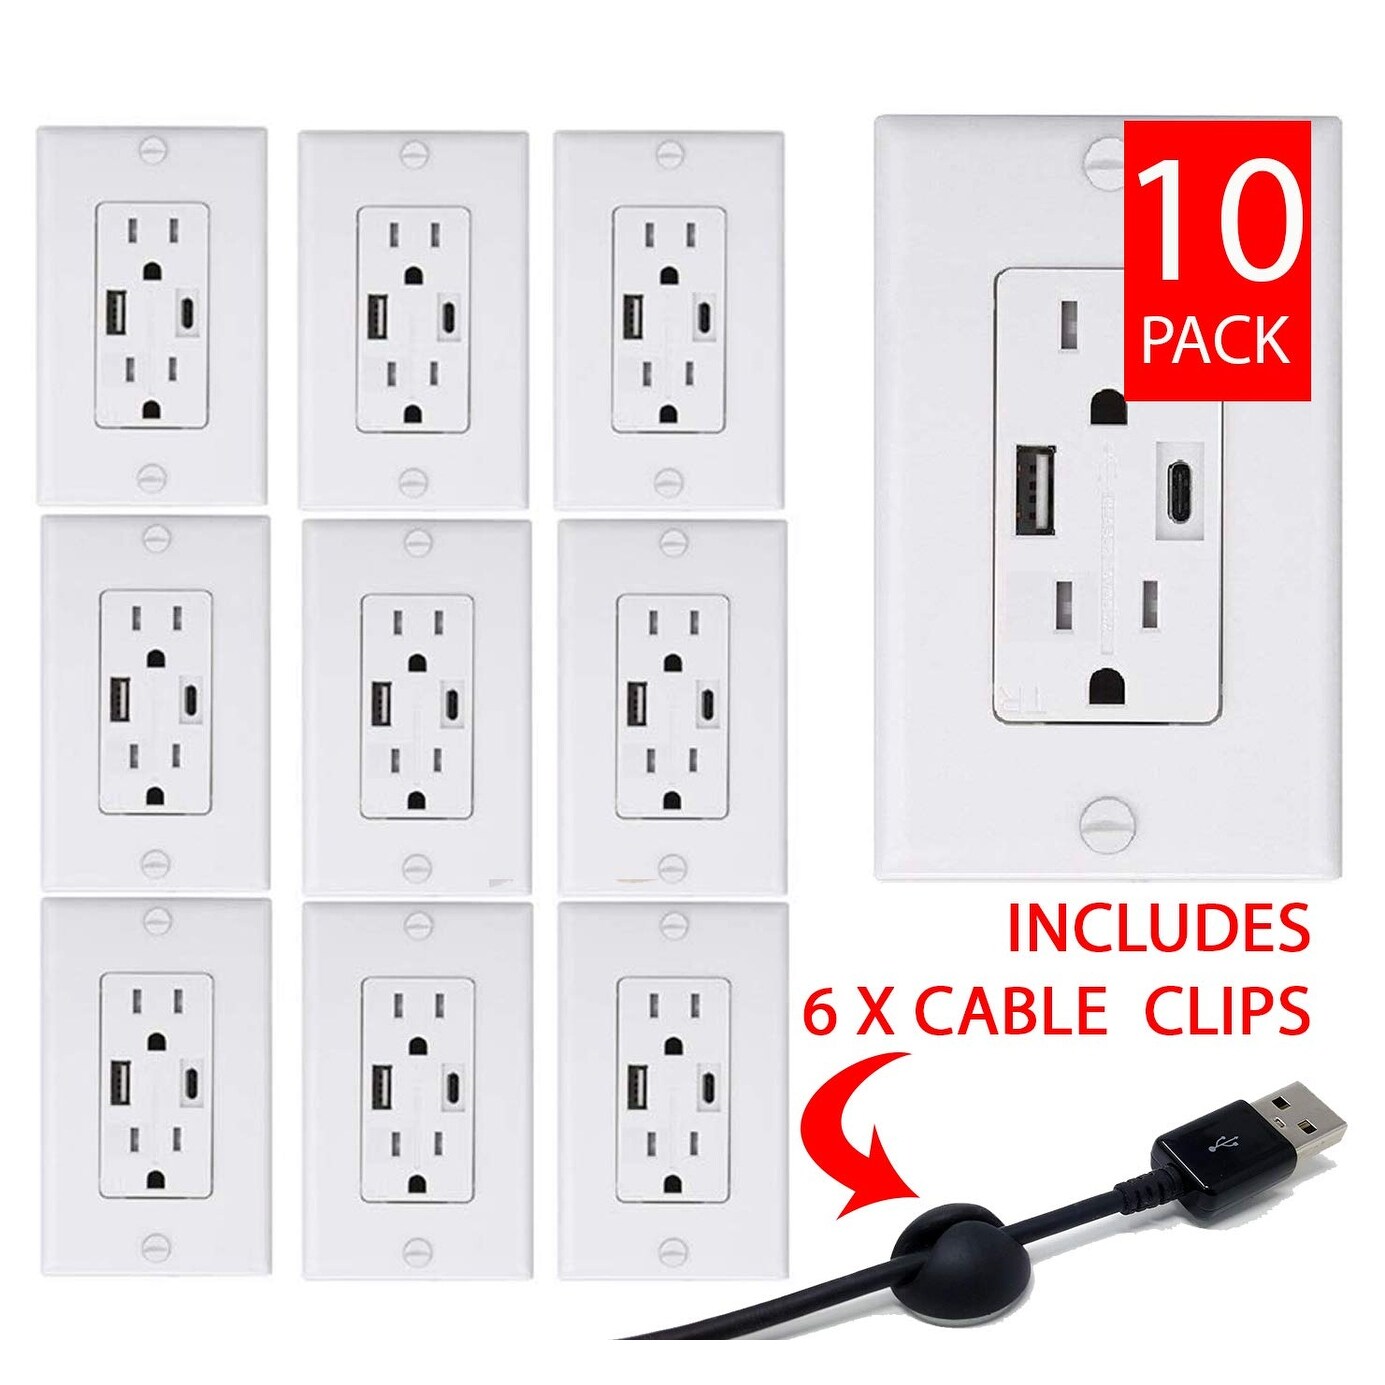 10 PACK 4.0A High Speed USB A/USB C Receptacle 15A Tamper Resistant Receptacle